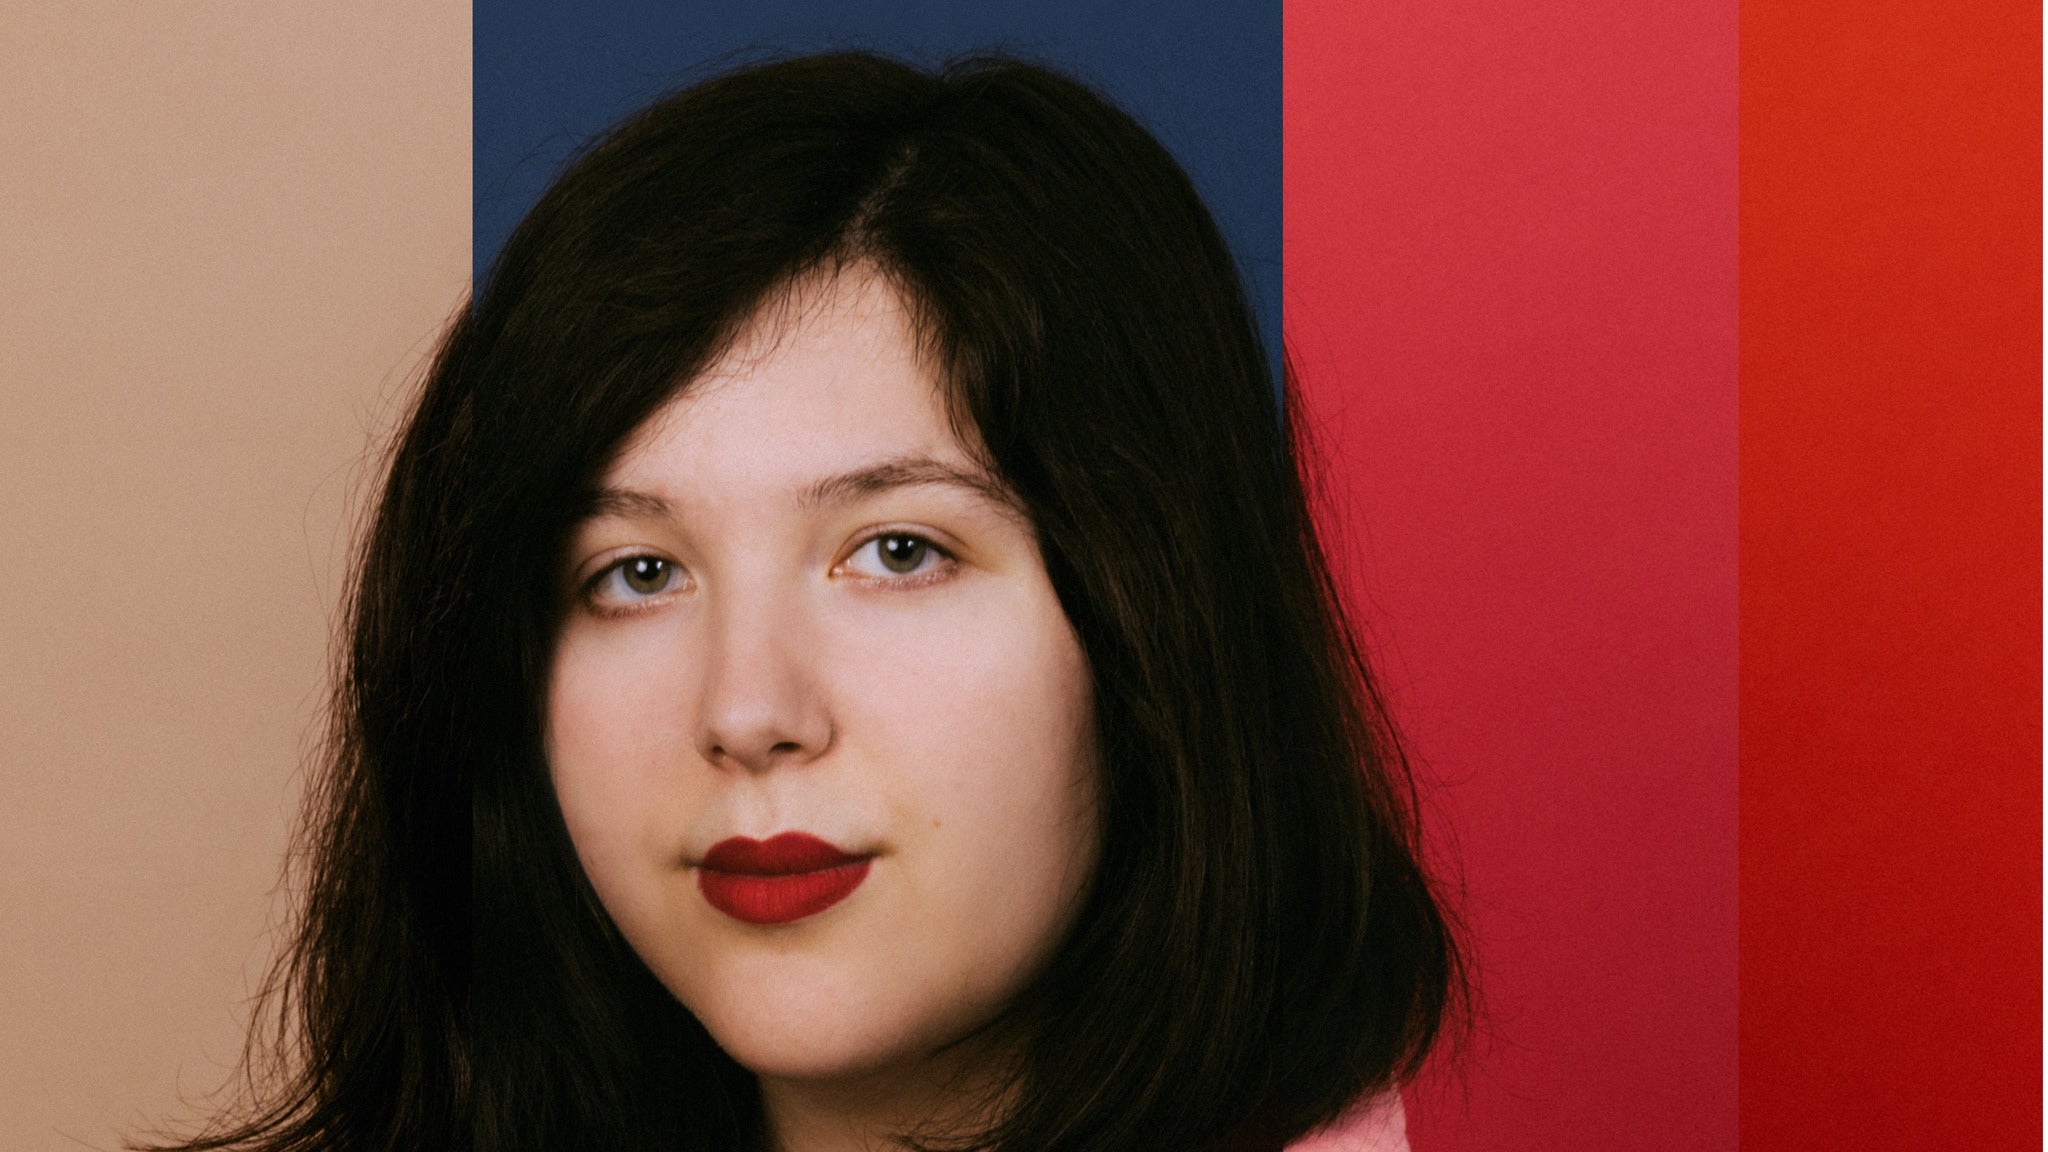 Lucy Dacus in Saint Louis promo photo for Delmar Hall presale offer code